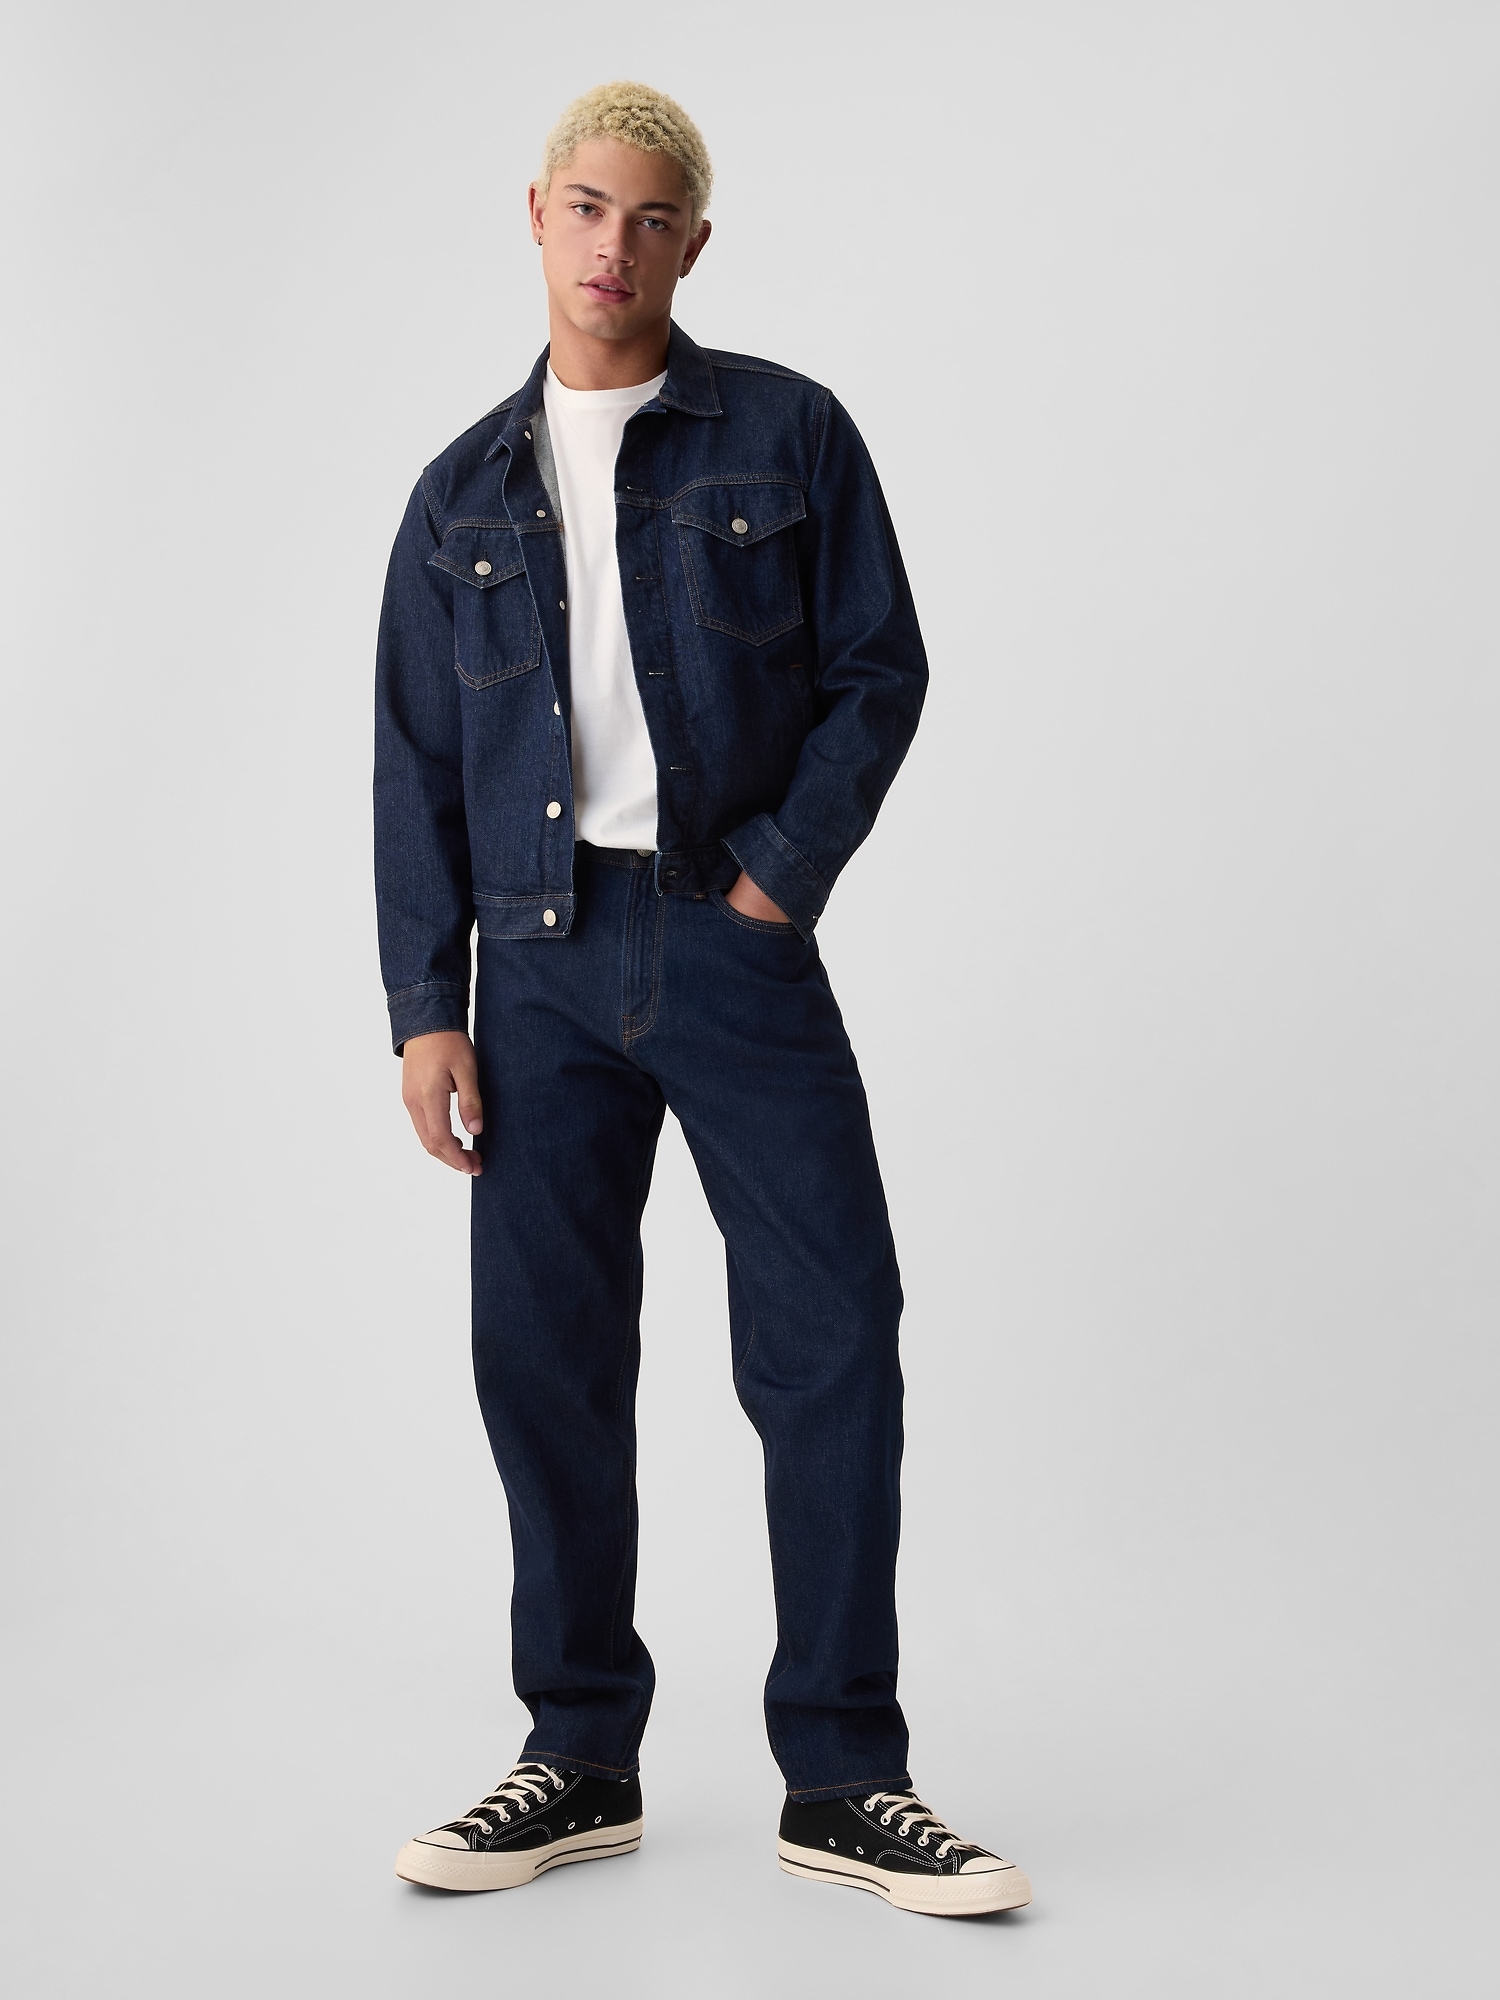 Relaxed Taper Jeans in GapFlex | Gap